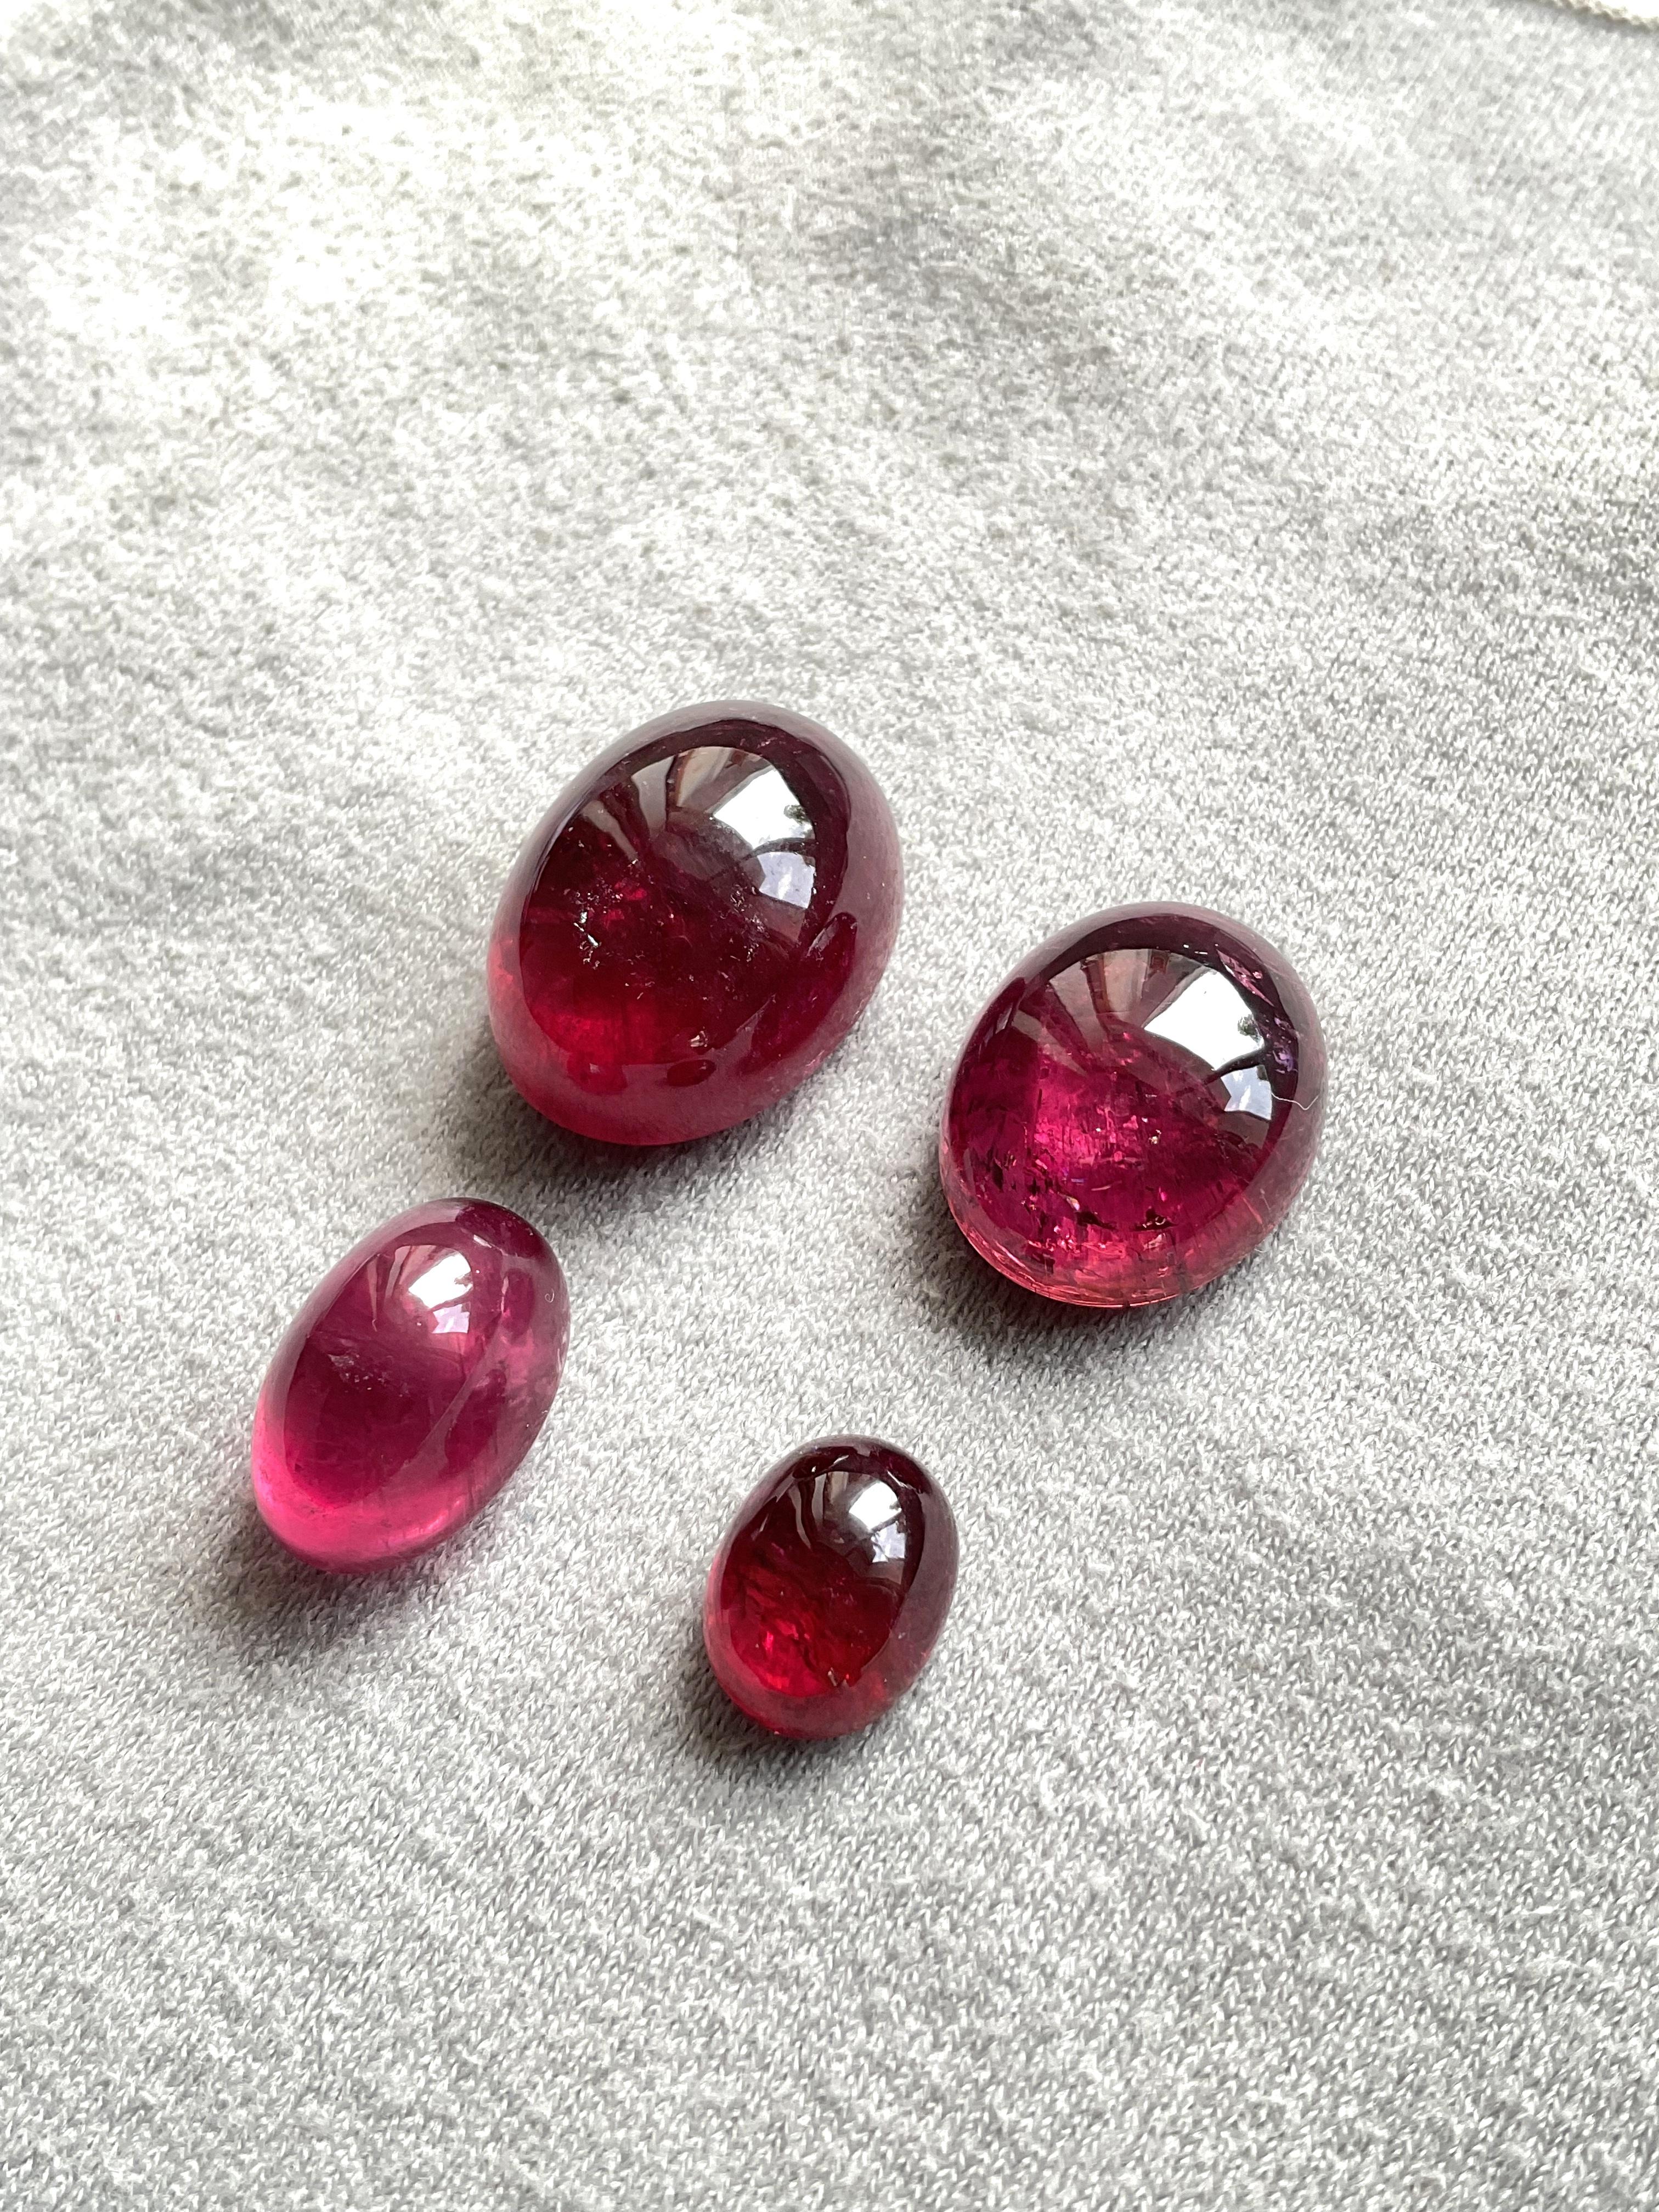 92.86 Carats Top Quality Rubellite Tourmaline Cabochon 4 Pieces Natural Gemstone For Sale 1